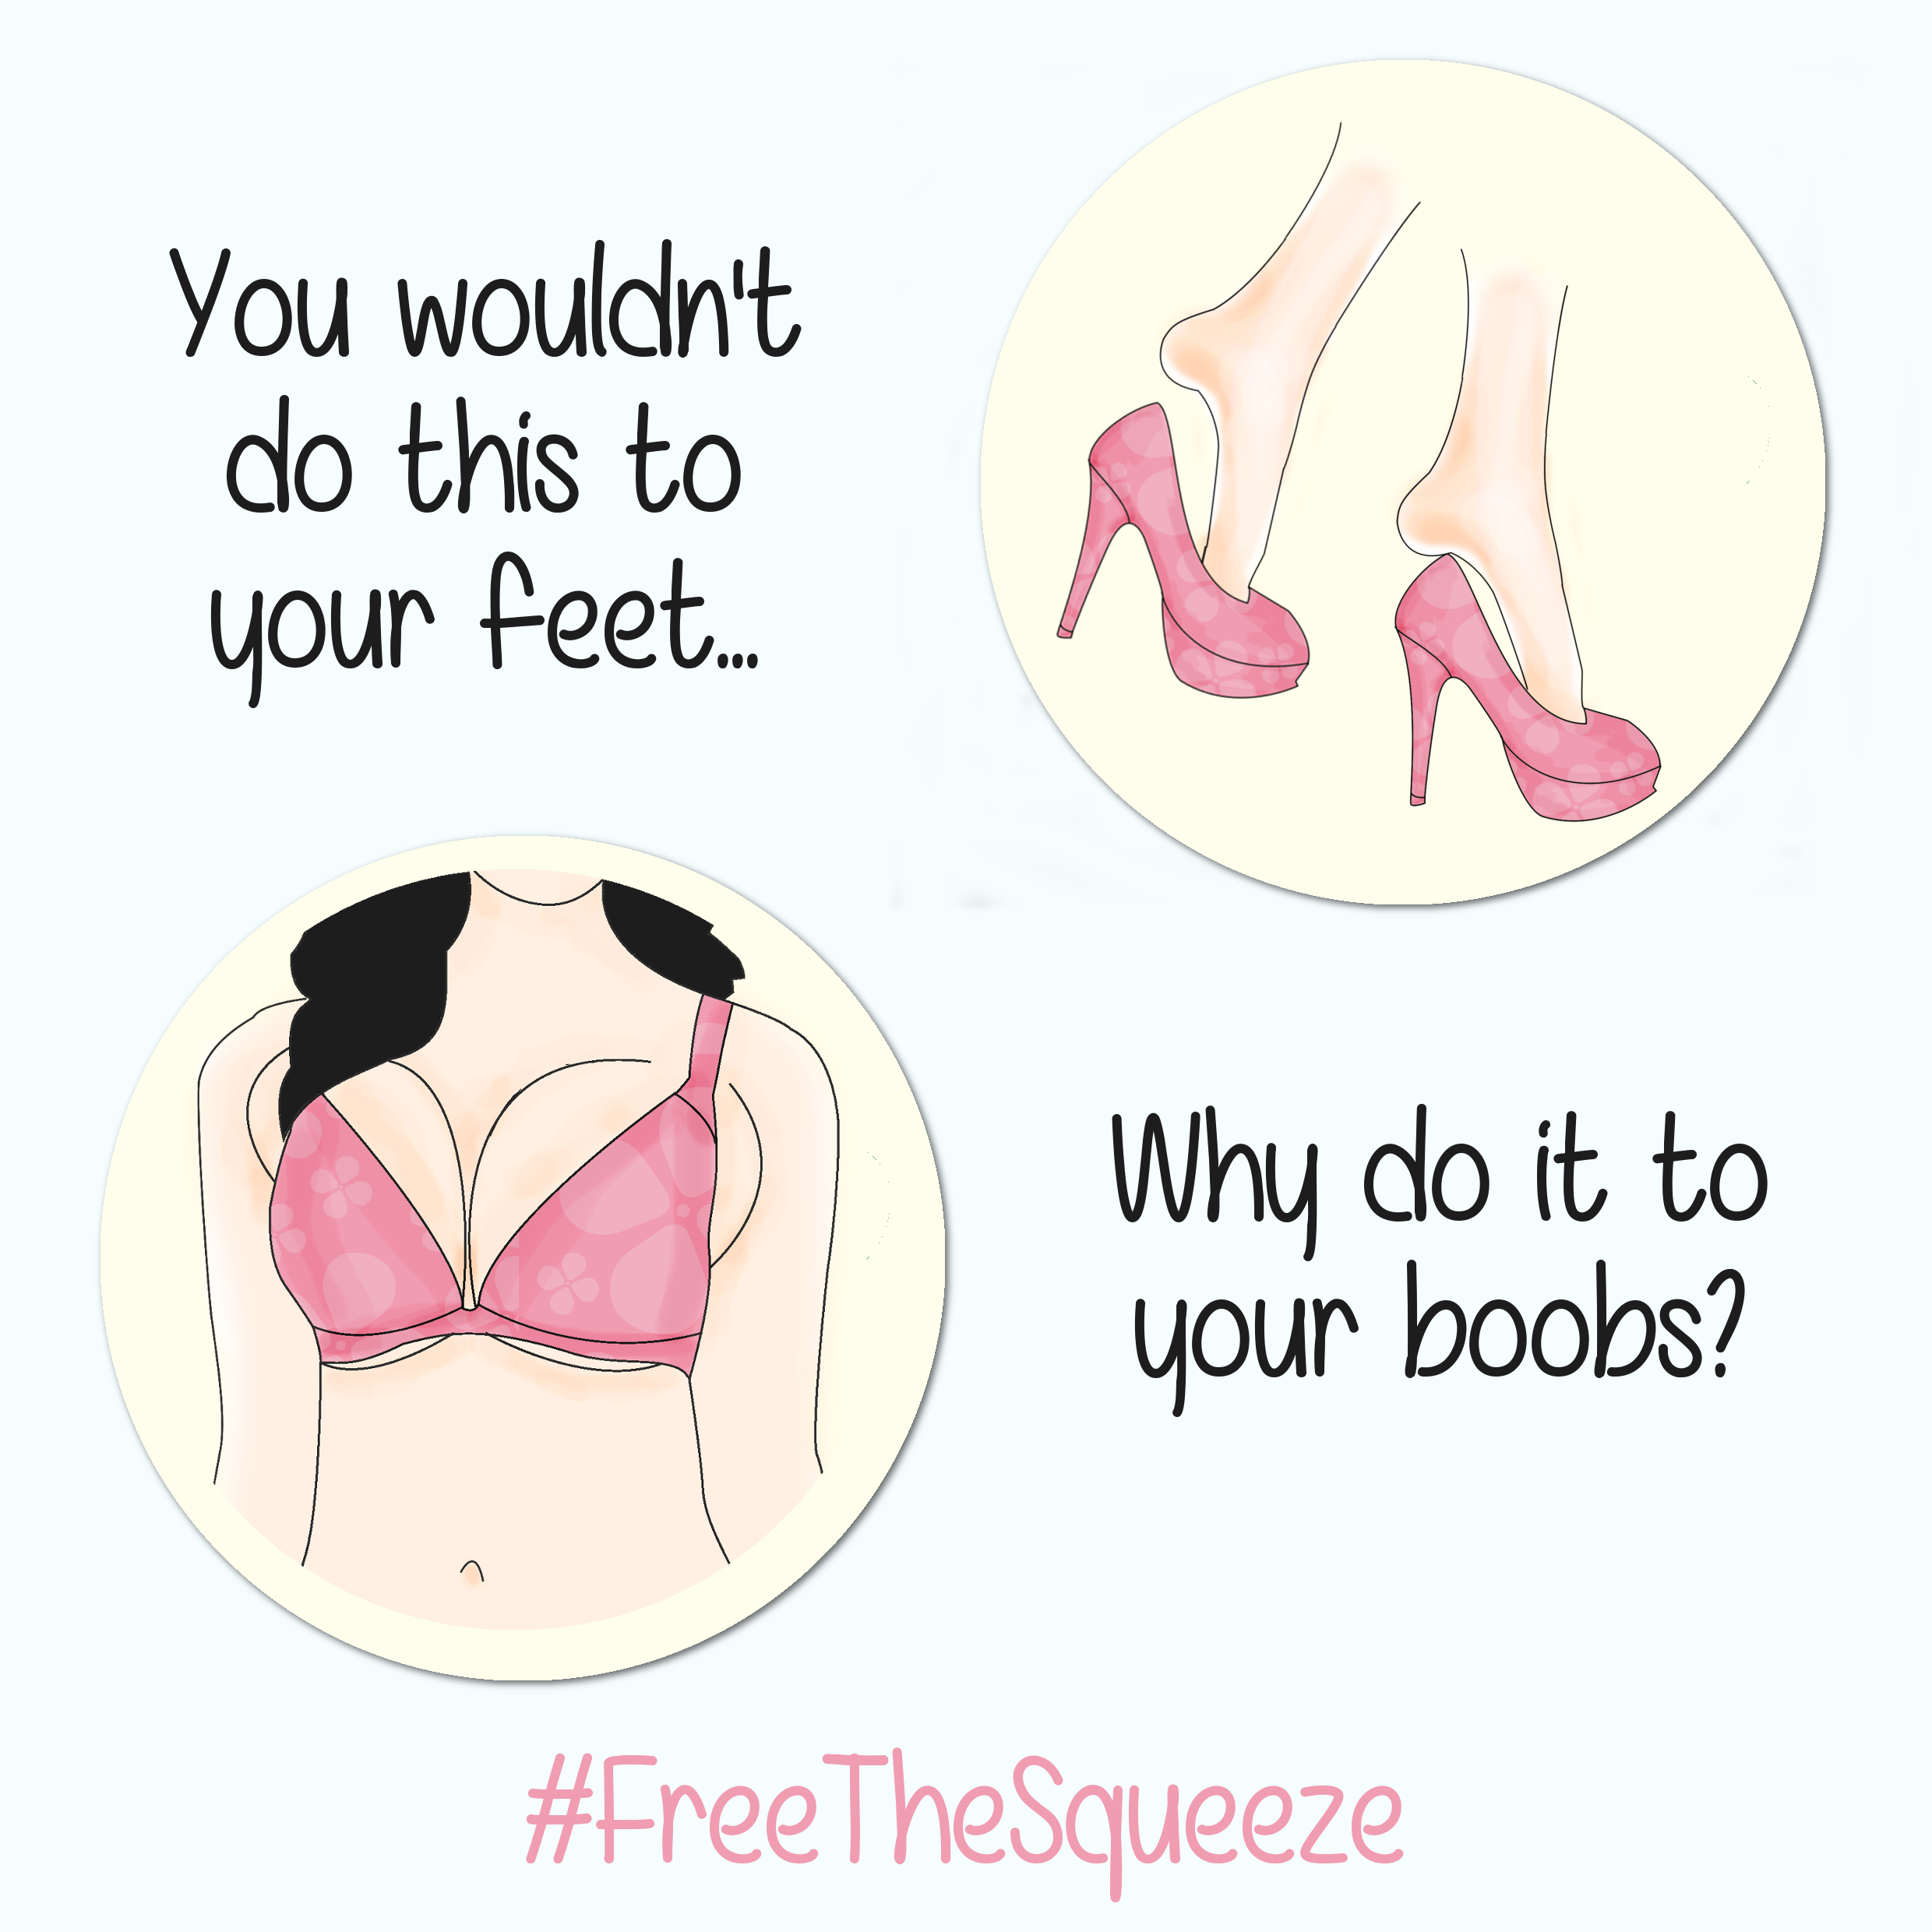 Want help to #FreeTheSqueeze ?- Say goodbye to bad fitting bras